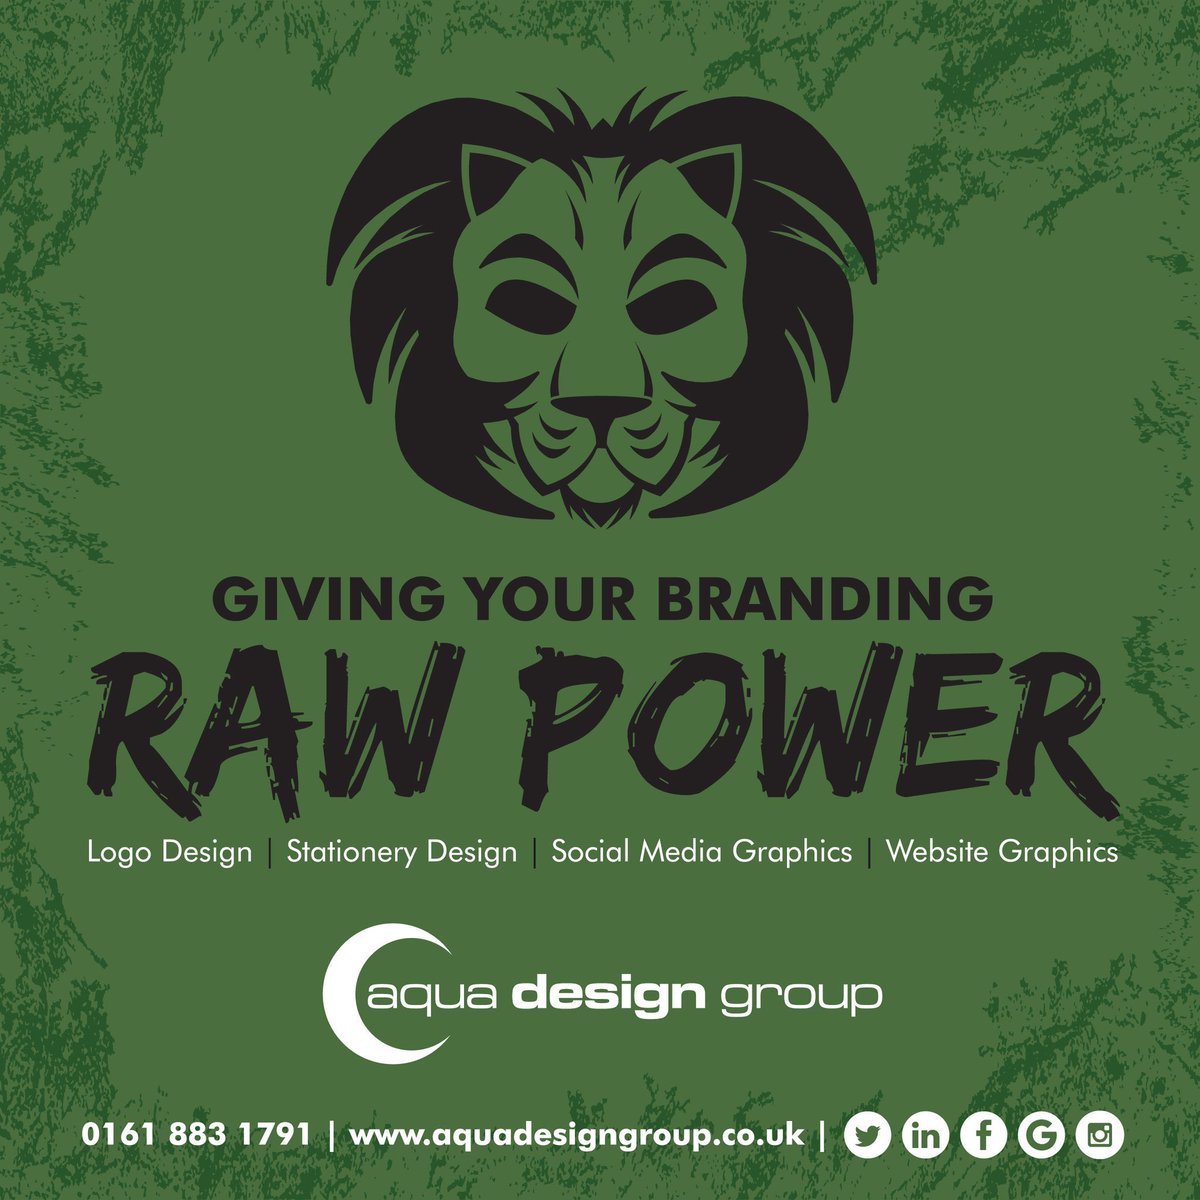 Give your #smallbusiness branding raw power. Come and have a chat about #logodesign and more 😊 #smallbusinessbigdreams #Startup #ShopIndie #BizBubble #Stockport #NorthWest aquadesigngroup.co.uk